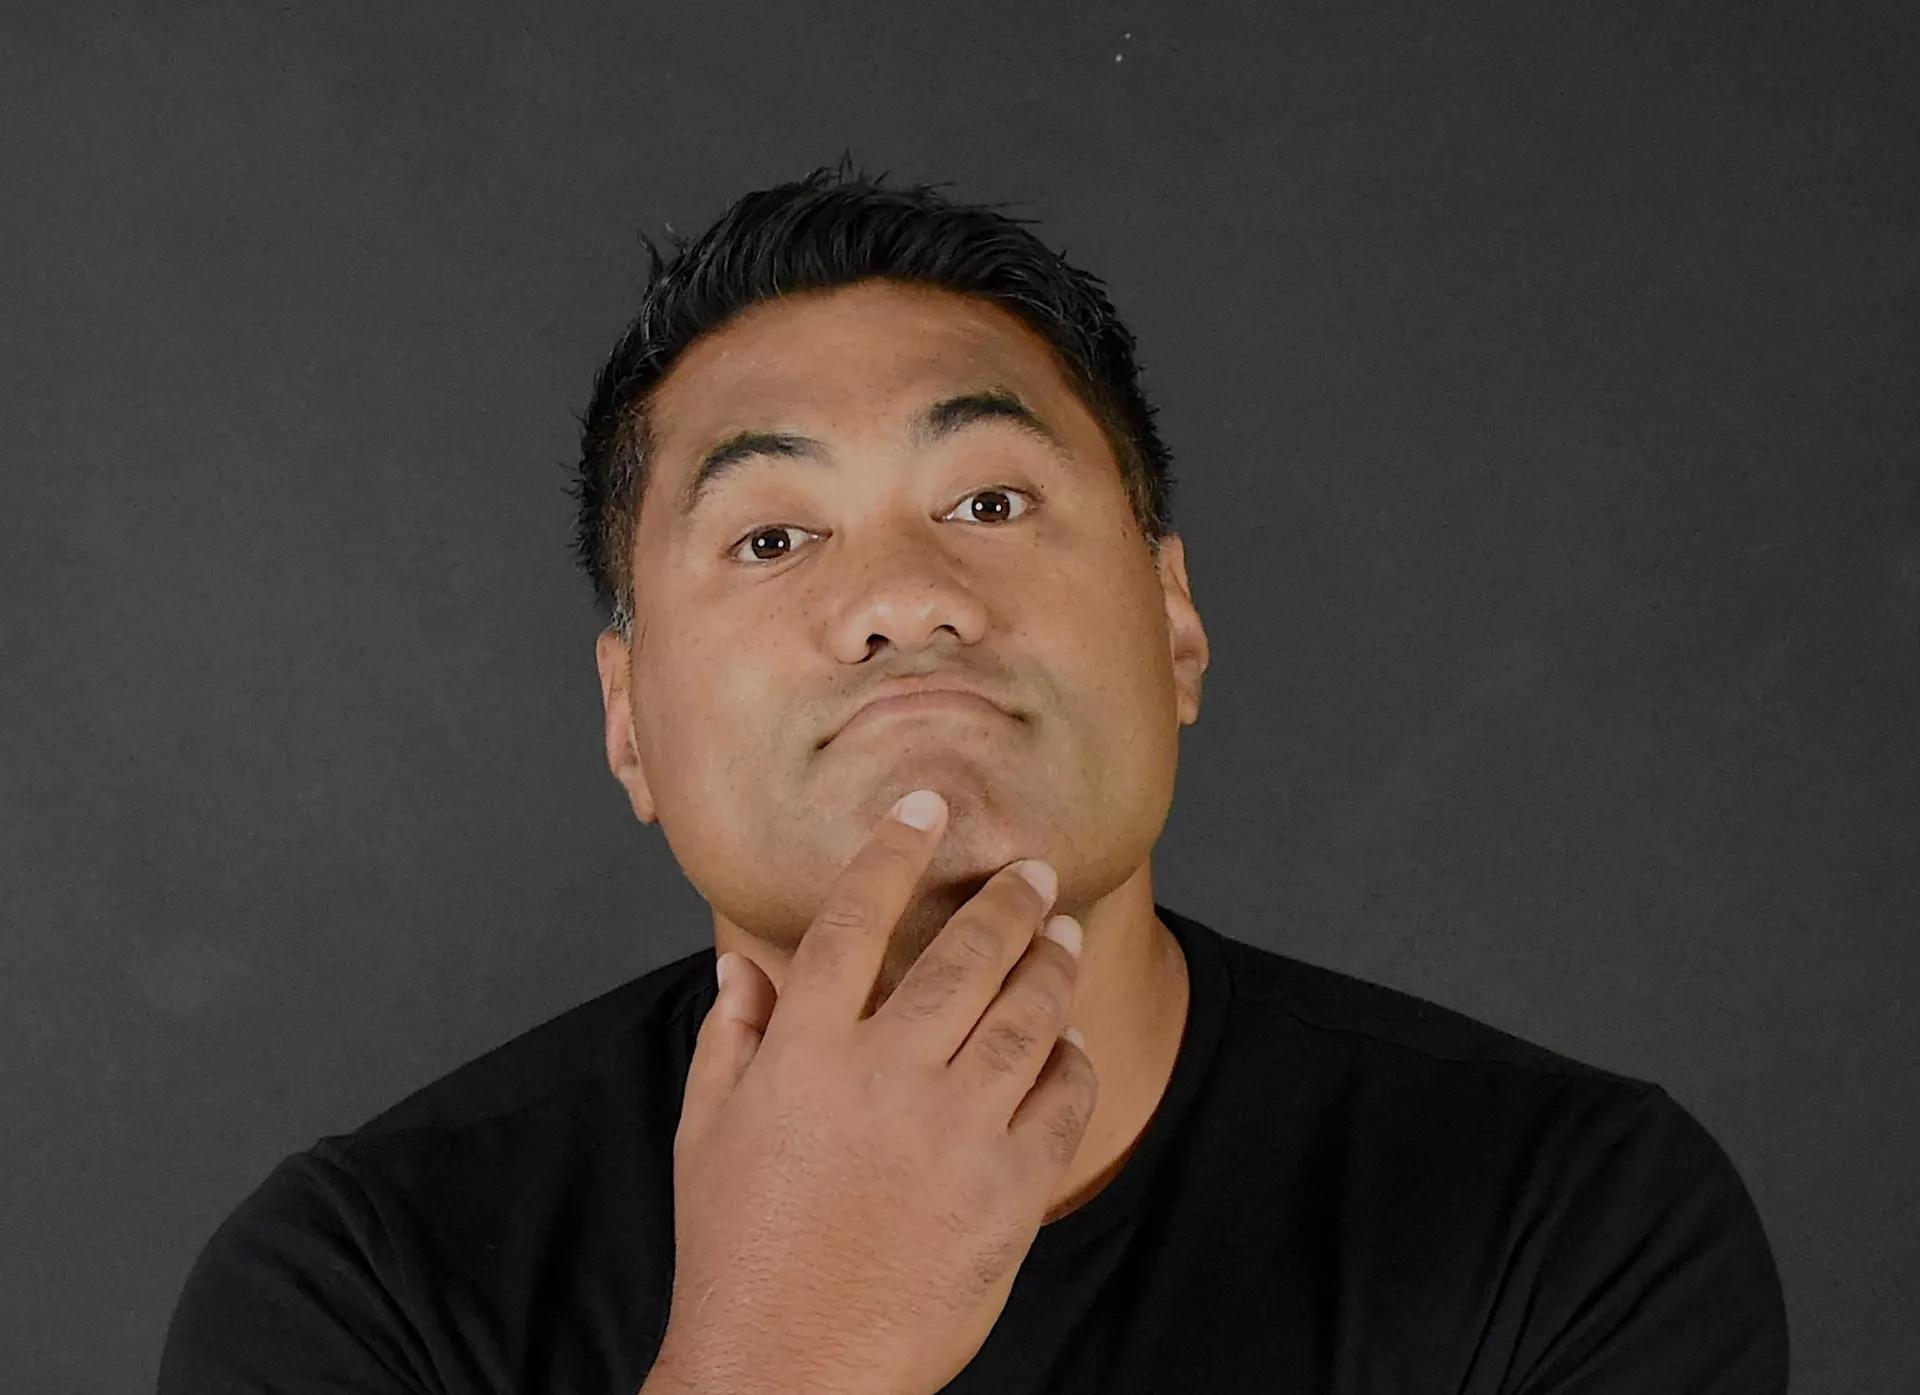 Stand-up comedian, Li'i Alaimoana, wears a black T-shirt, poses in front of a grey background with his right hand touching his chin.